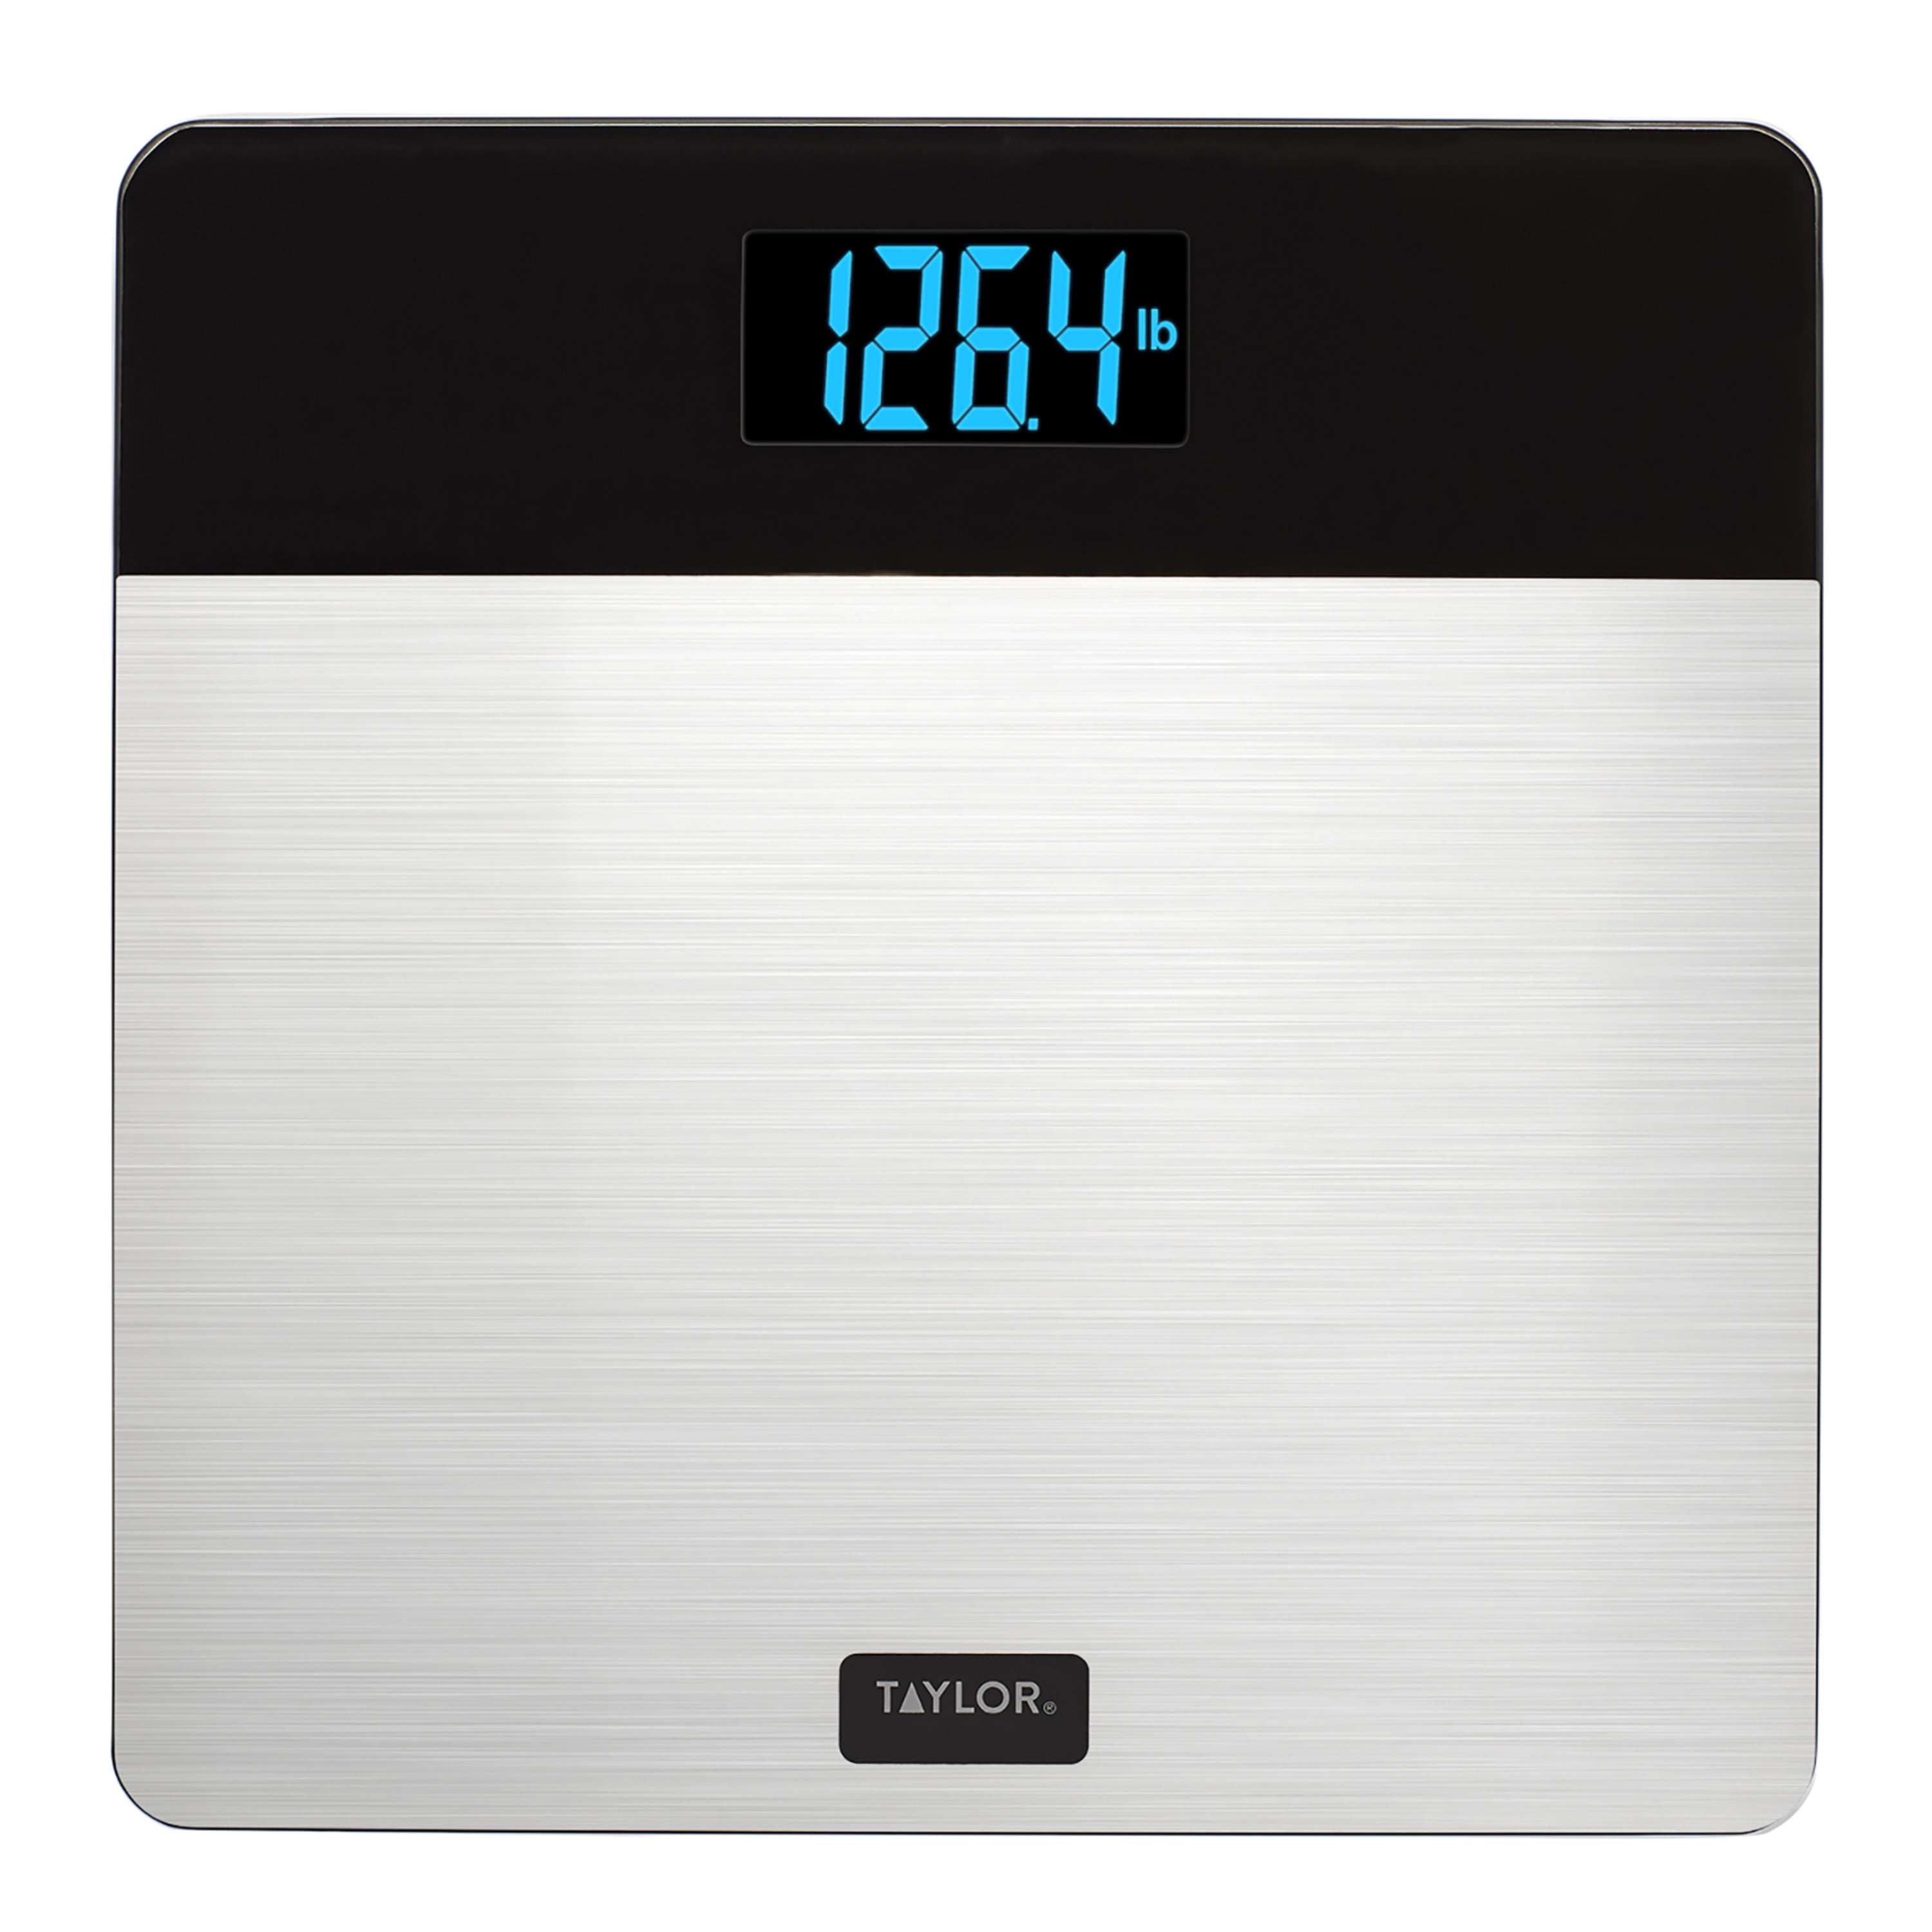 Taylor Brushed Stainless Steel Scale with 400 lb Capacity